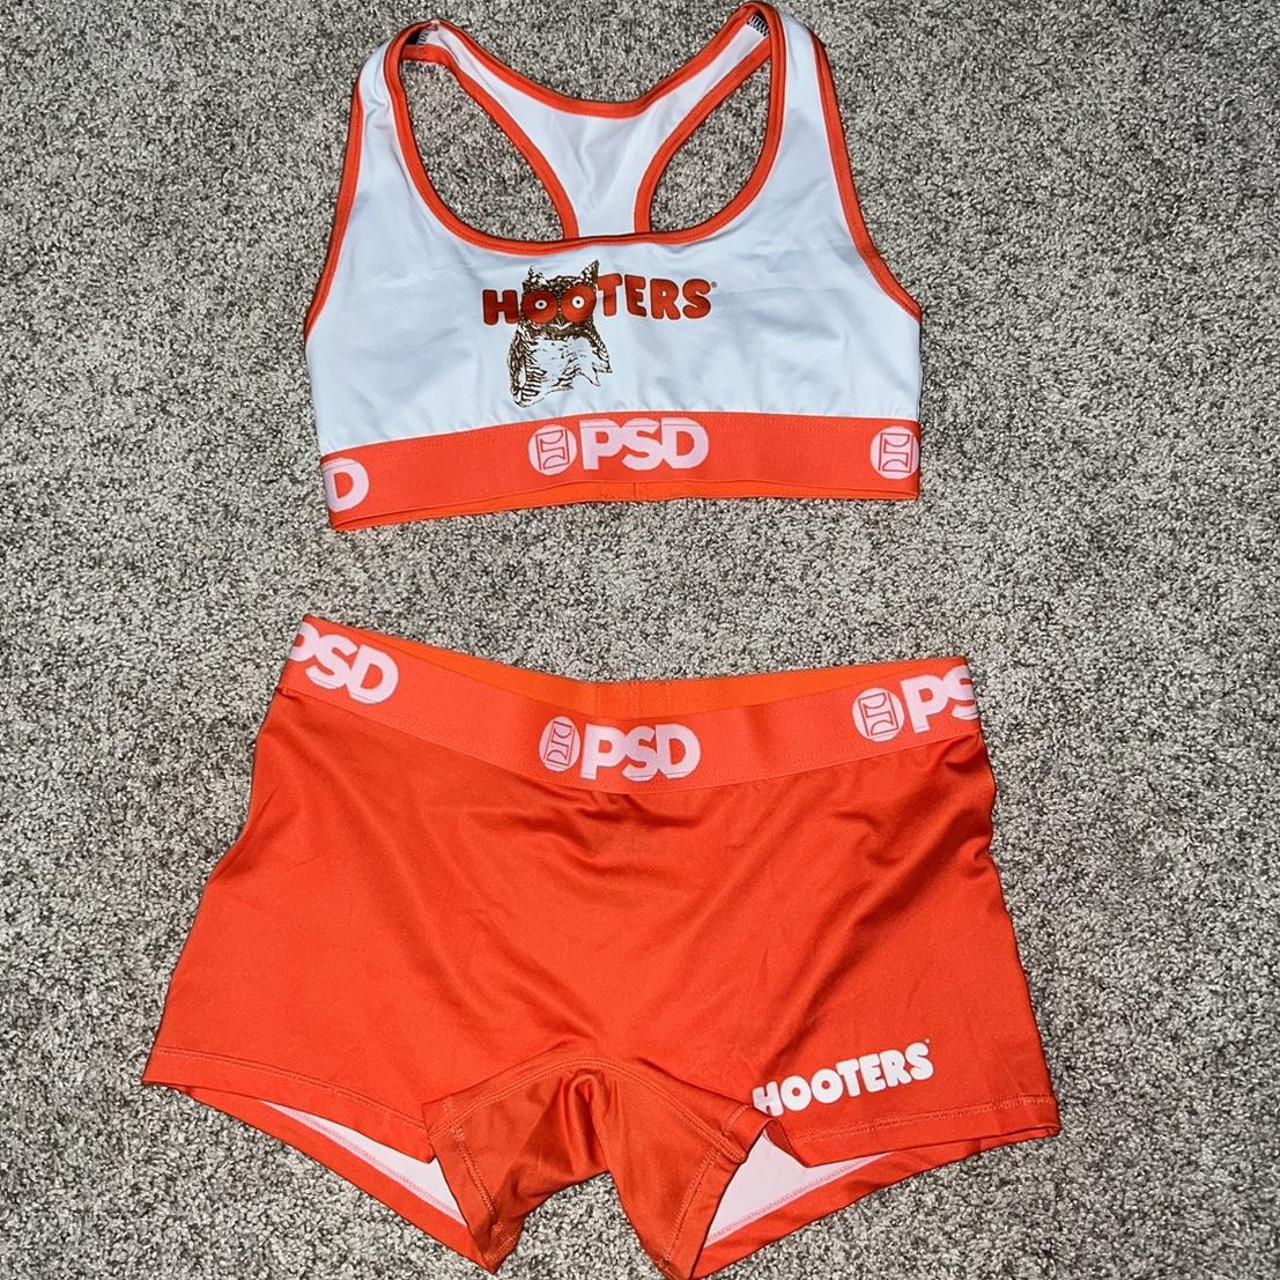 Brand new without tags PSD hooters sports bra and - Depop